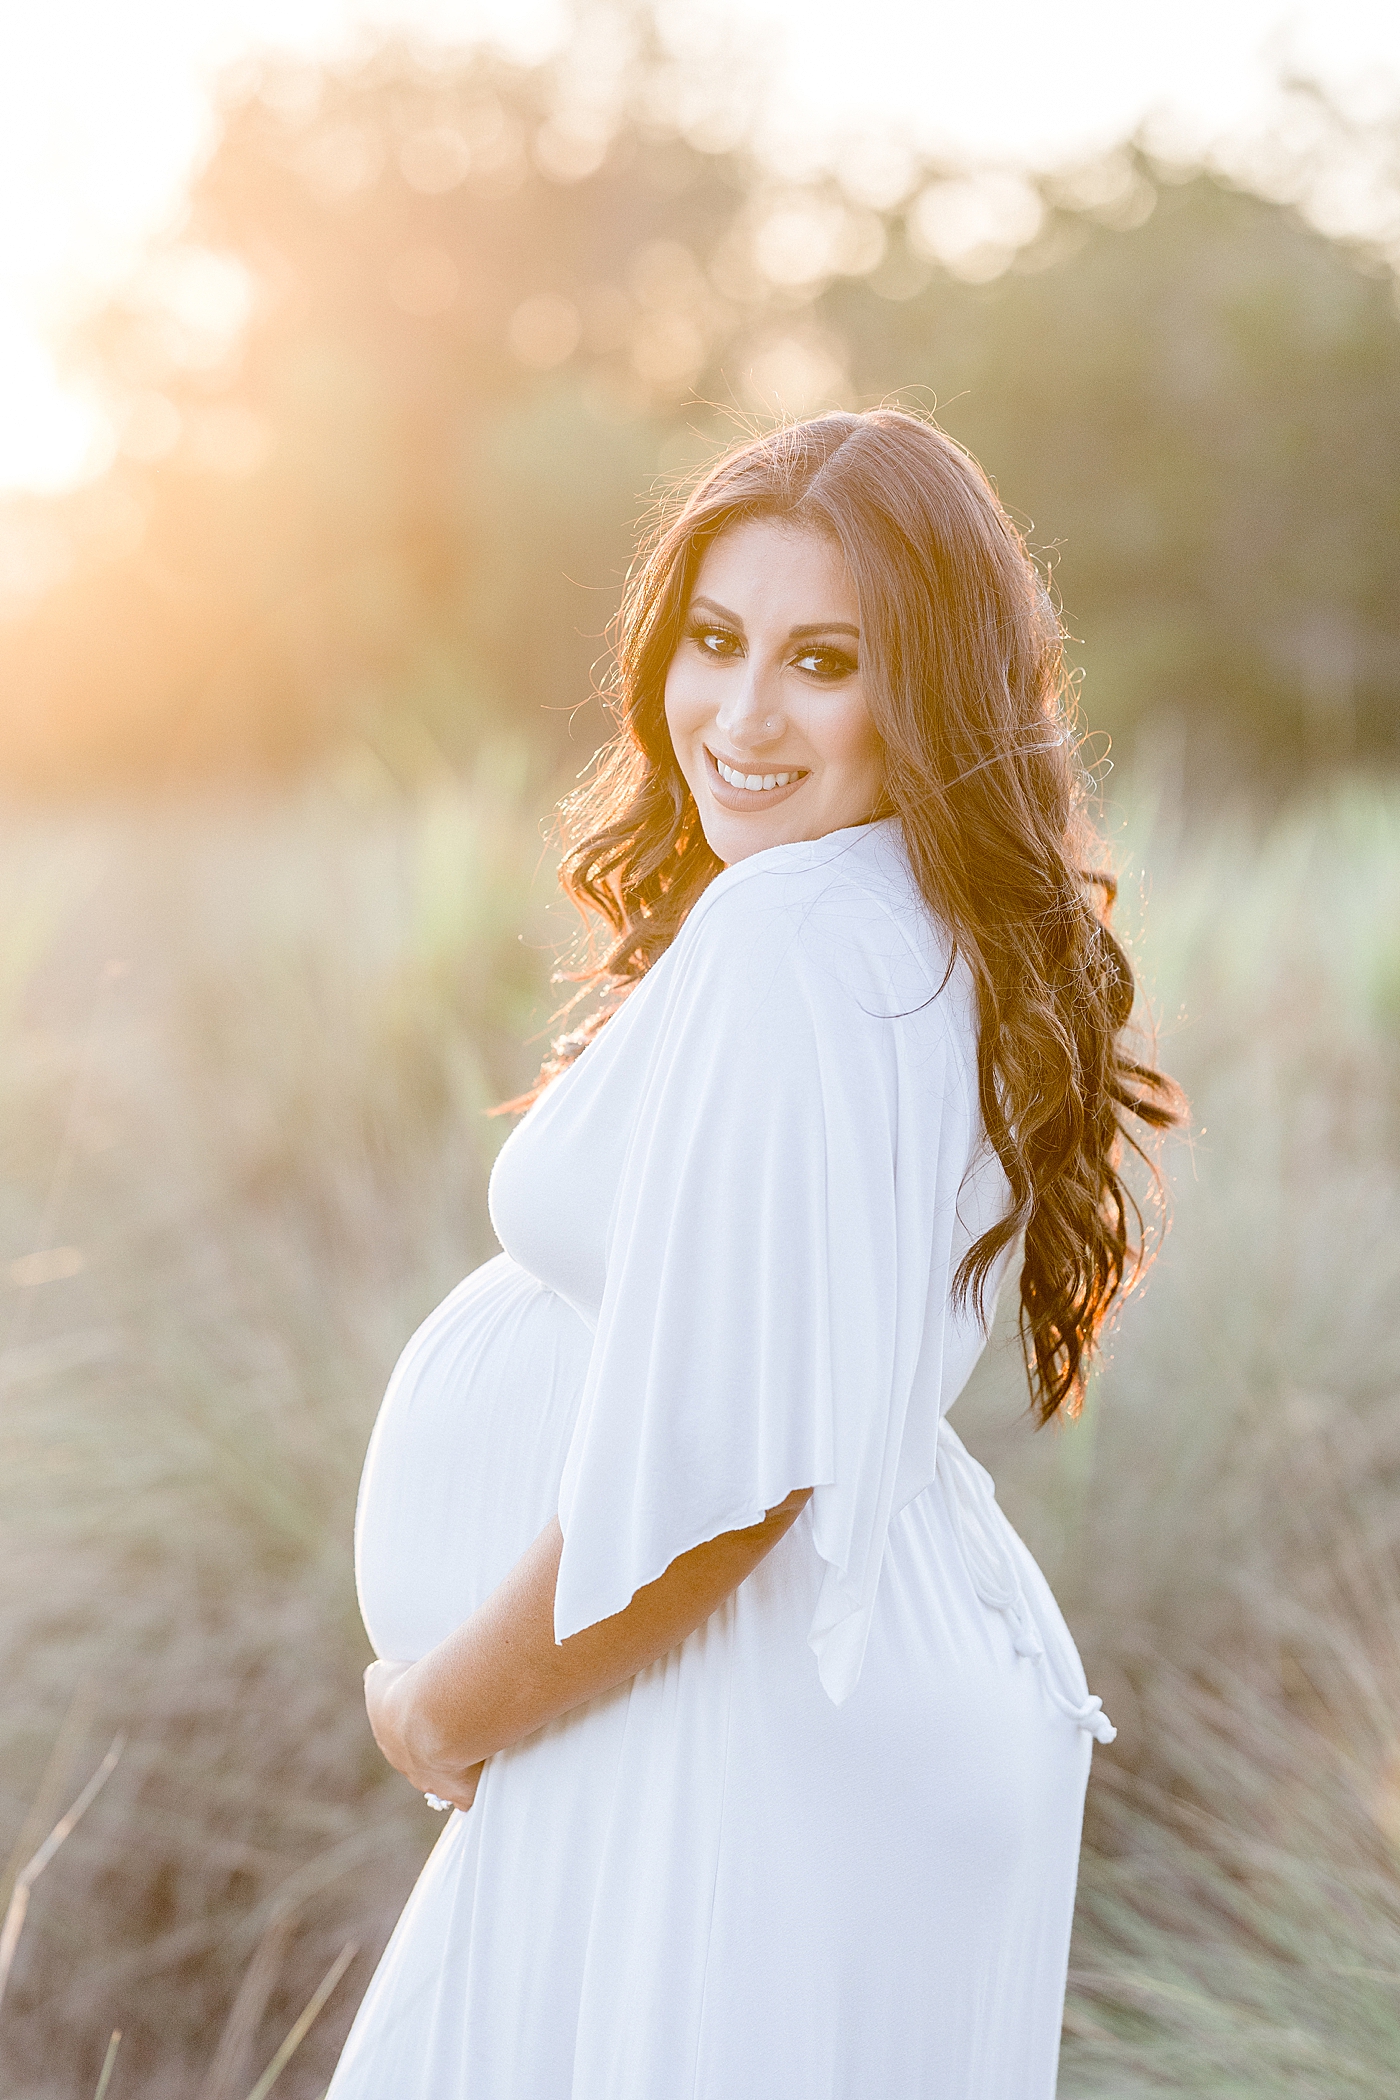 Golden hour sunset photo for pregnant momma. Photo by Brittany Elise Photography.